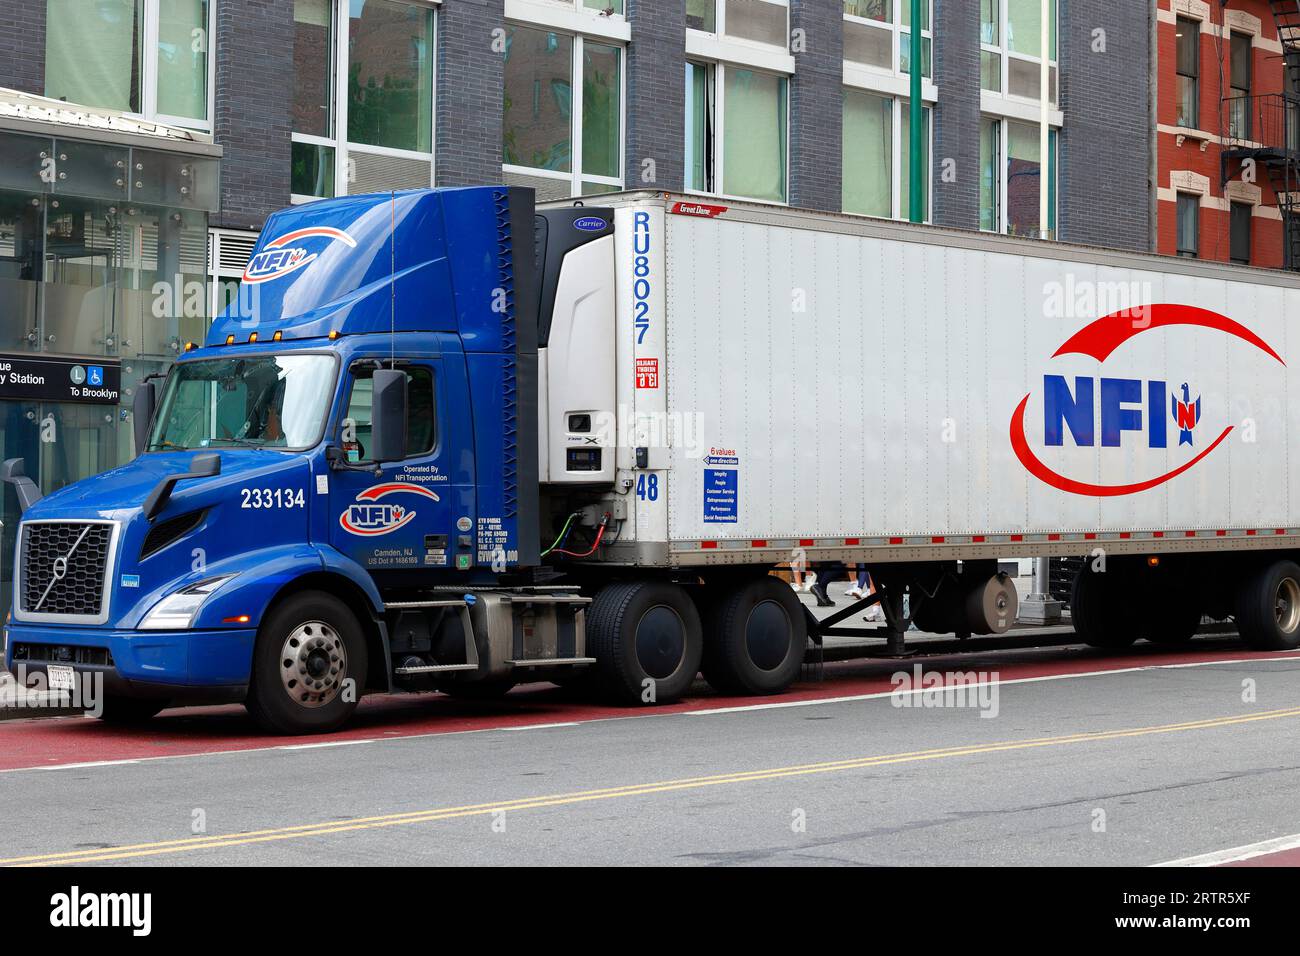 A NFI Industries, logistics, transportation, distribution truck. NFI is a supply chain management company headquartered in Camden, NJ. Stock Photo